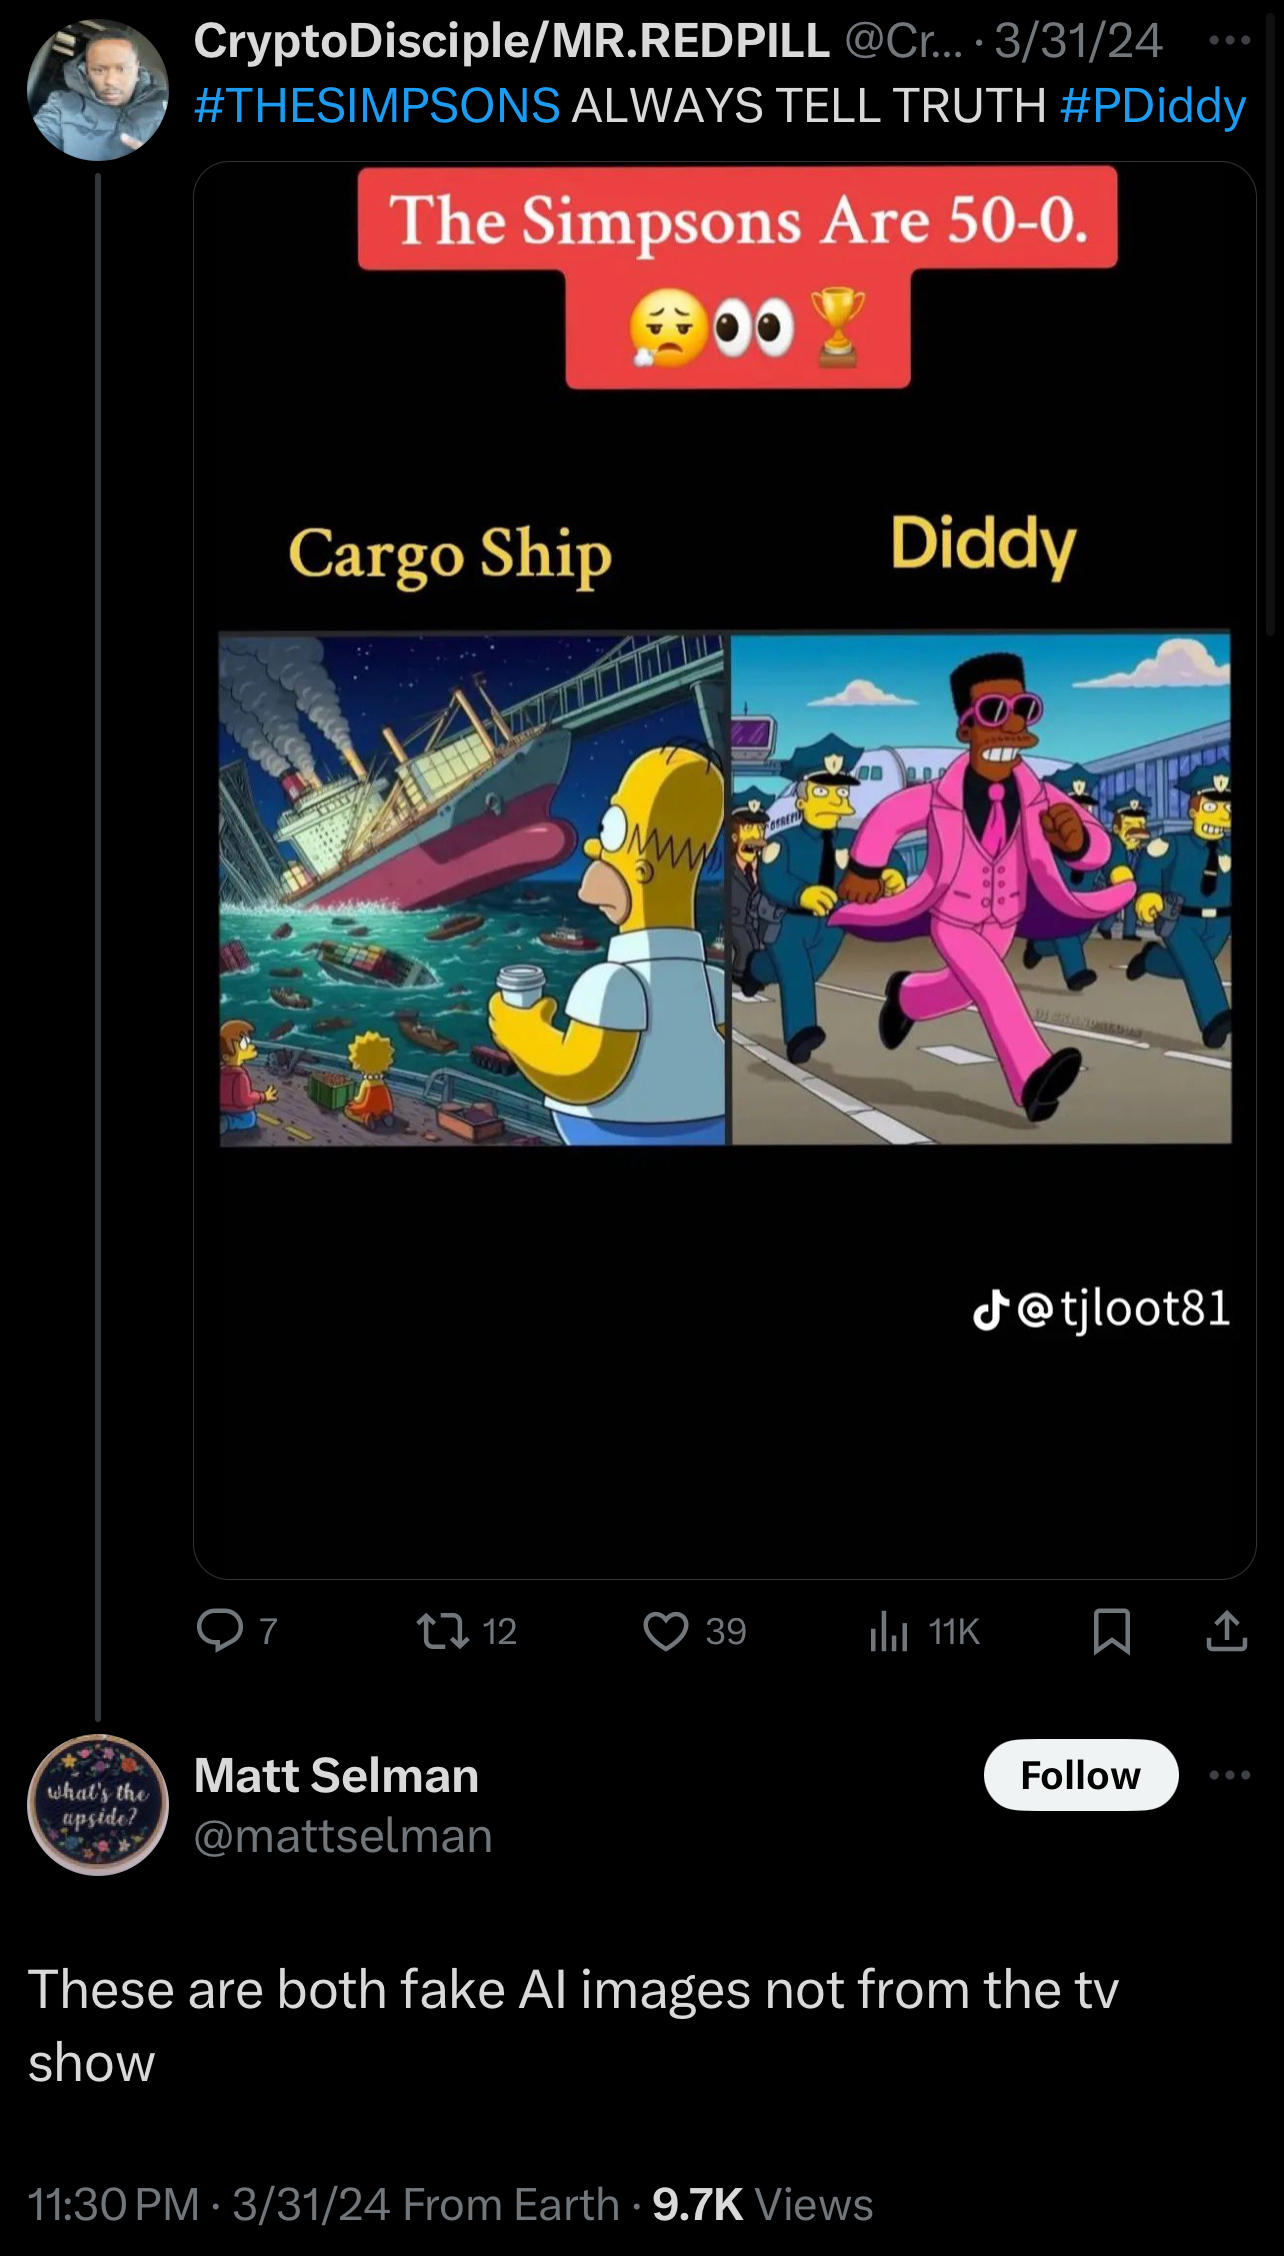 Tweet by CryptoDisciple saying &quot;THE SIMPSONS ALWAYS TELL TRUTH #PDidddy&quot; with AI images of Homer Simpson and P Diddy. Matt Selman replies: &quot;These are both fake AI images not from the TV show.&quot;